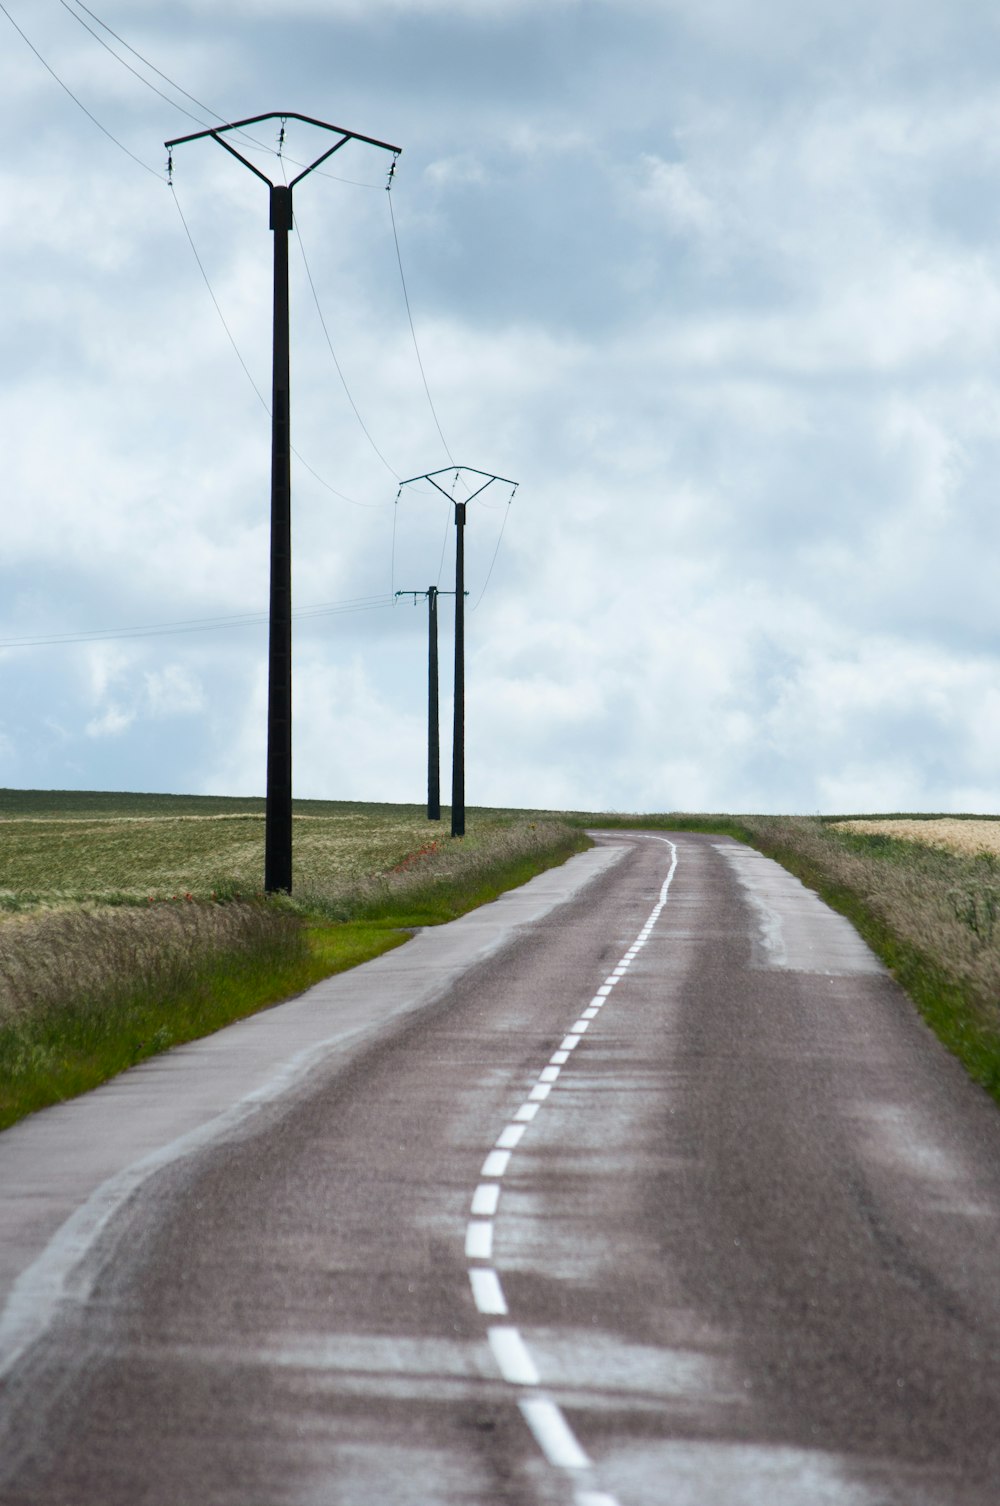 an empty road with power lines and telephone poles